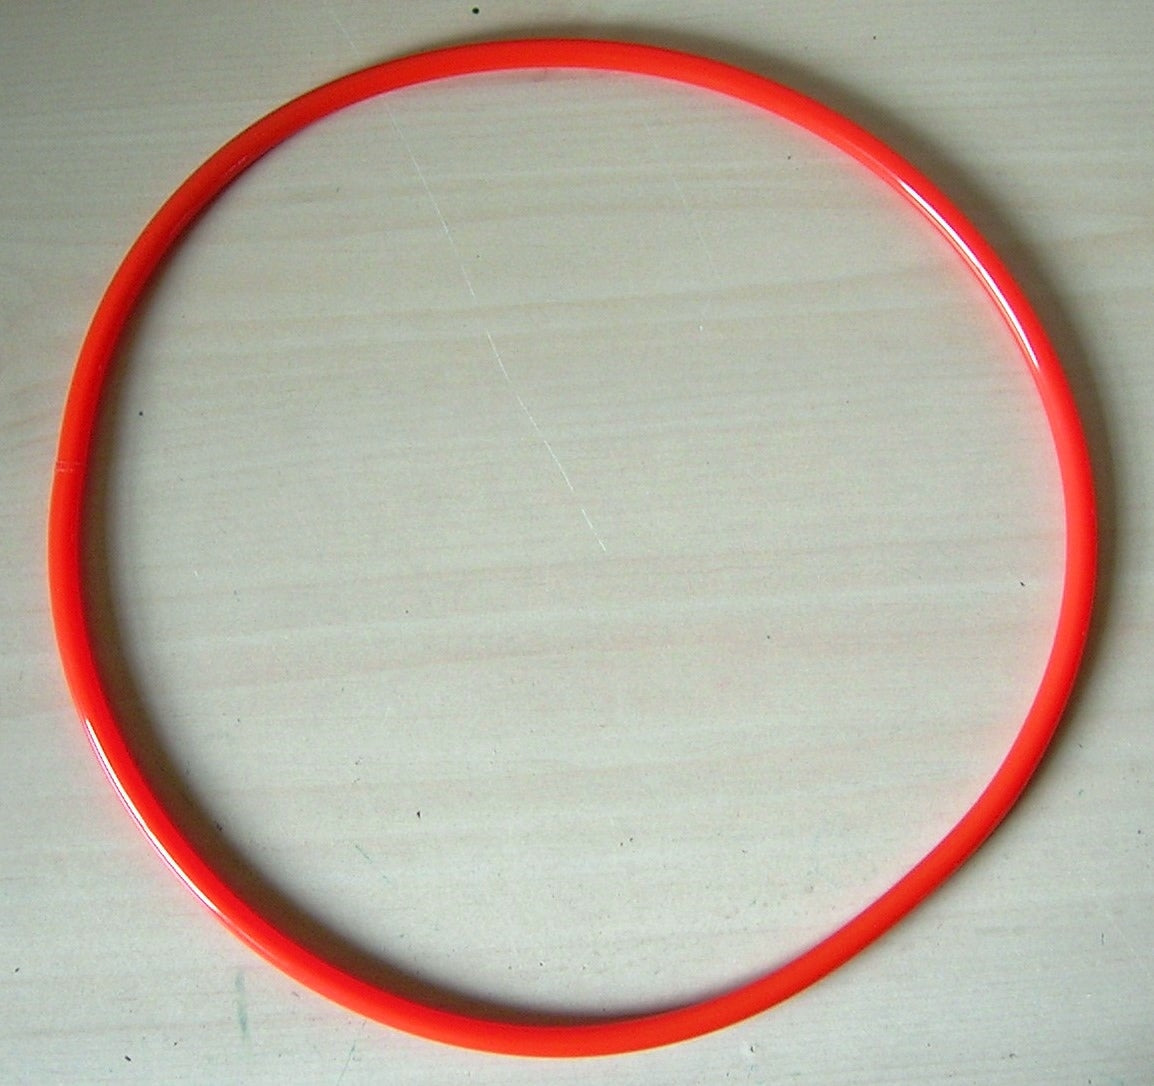 Replacement Round Drive BELT for VWR mini shaker 12620-938